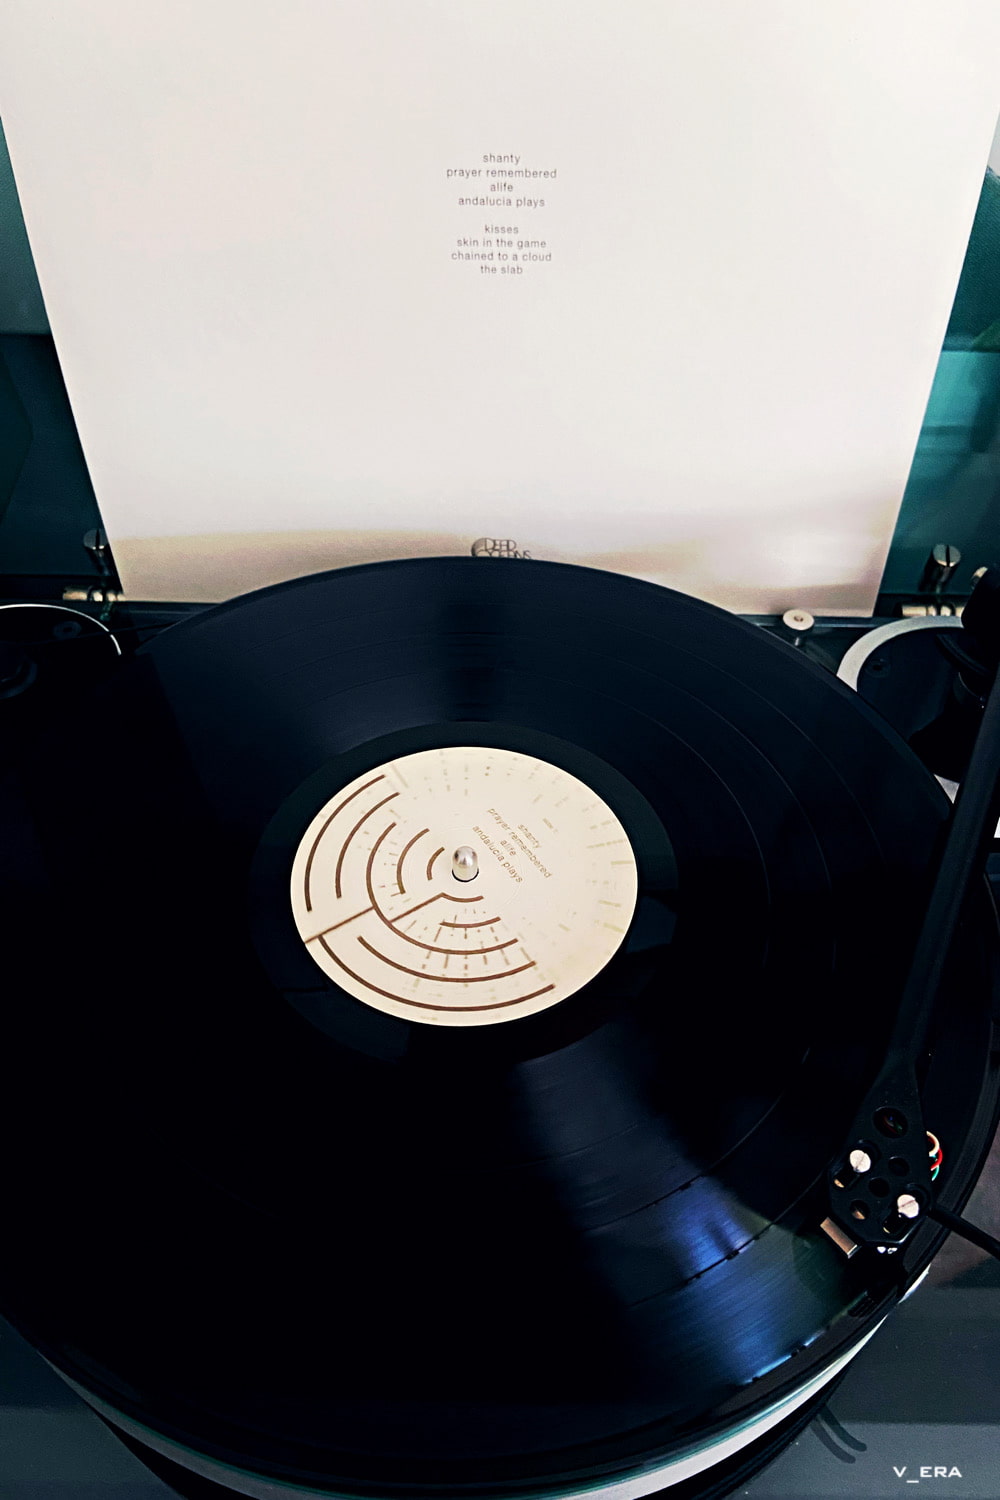 slowdive everything is alive turntable